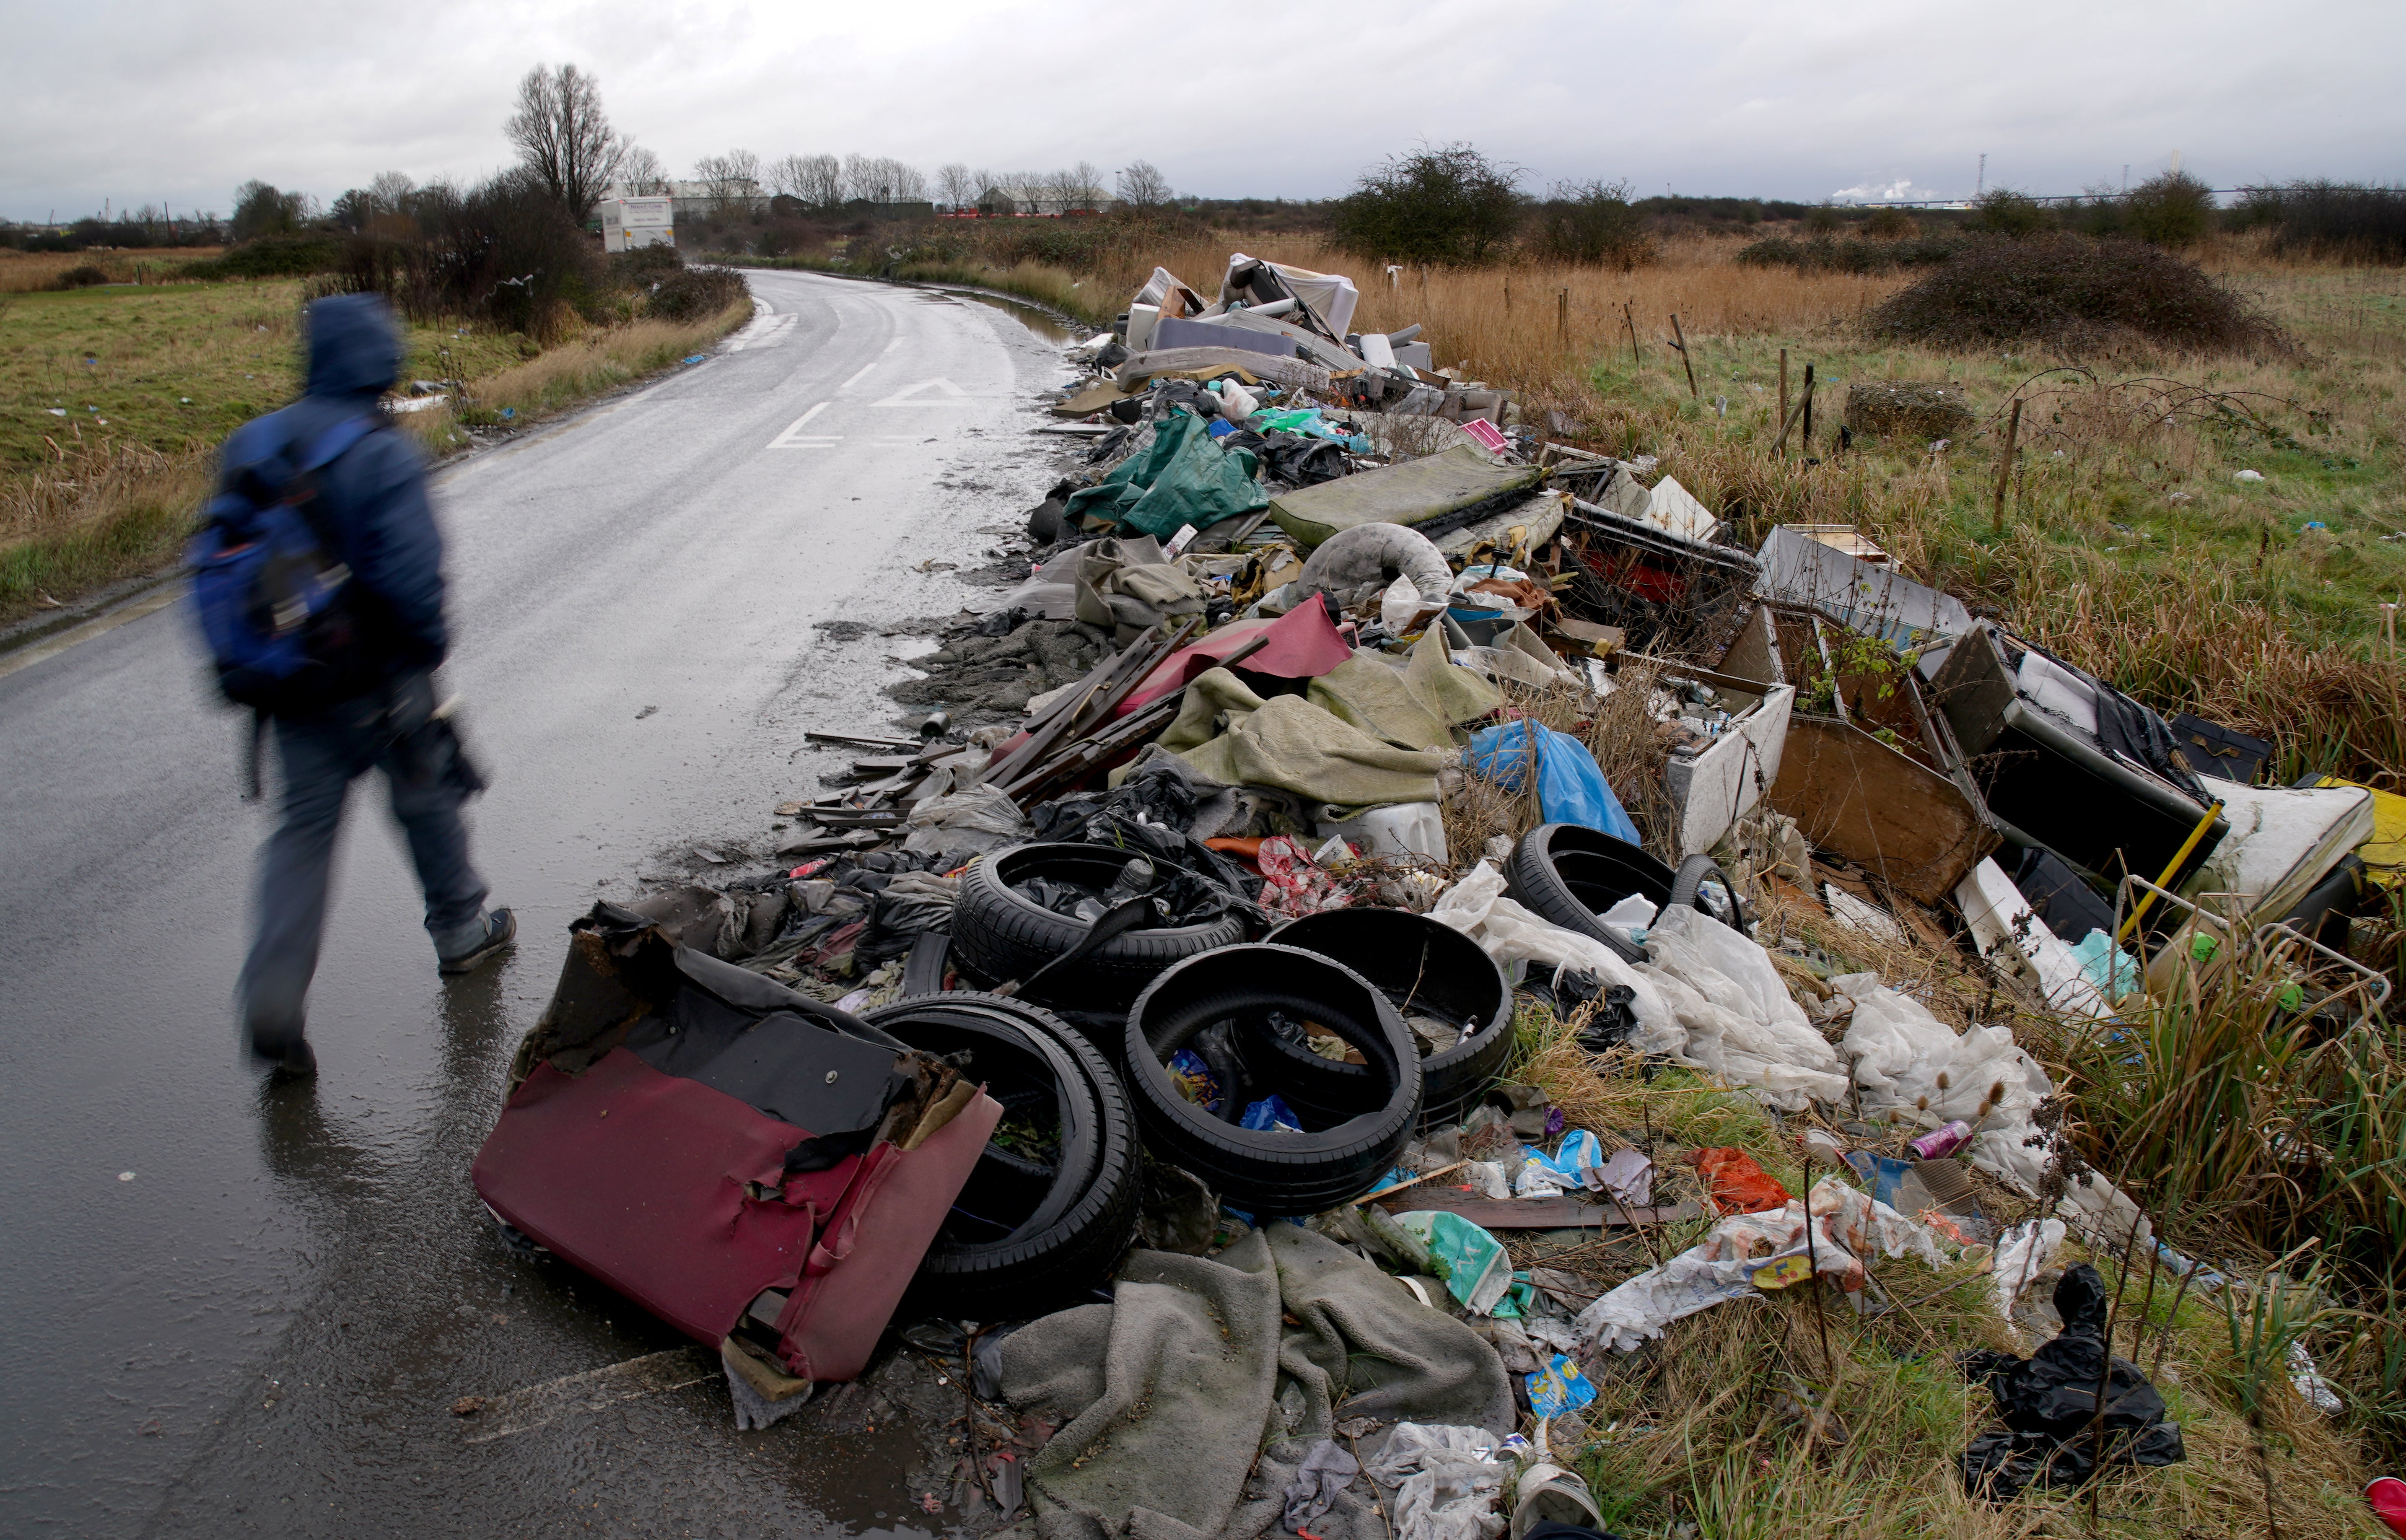 The Government does not have the data it needs to assess the scale of waste crime in England, according to the National Audit Office (Gareth Fuller/PA)